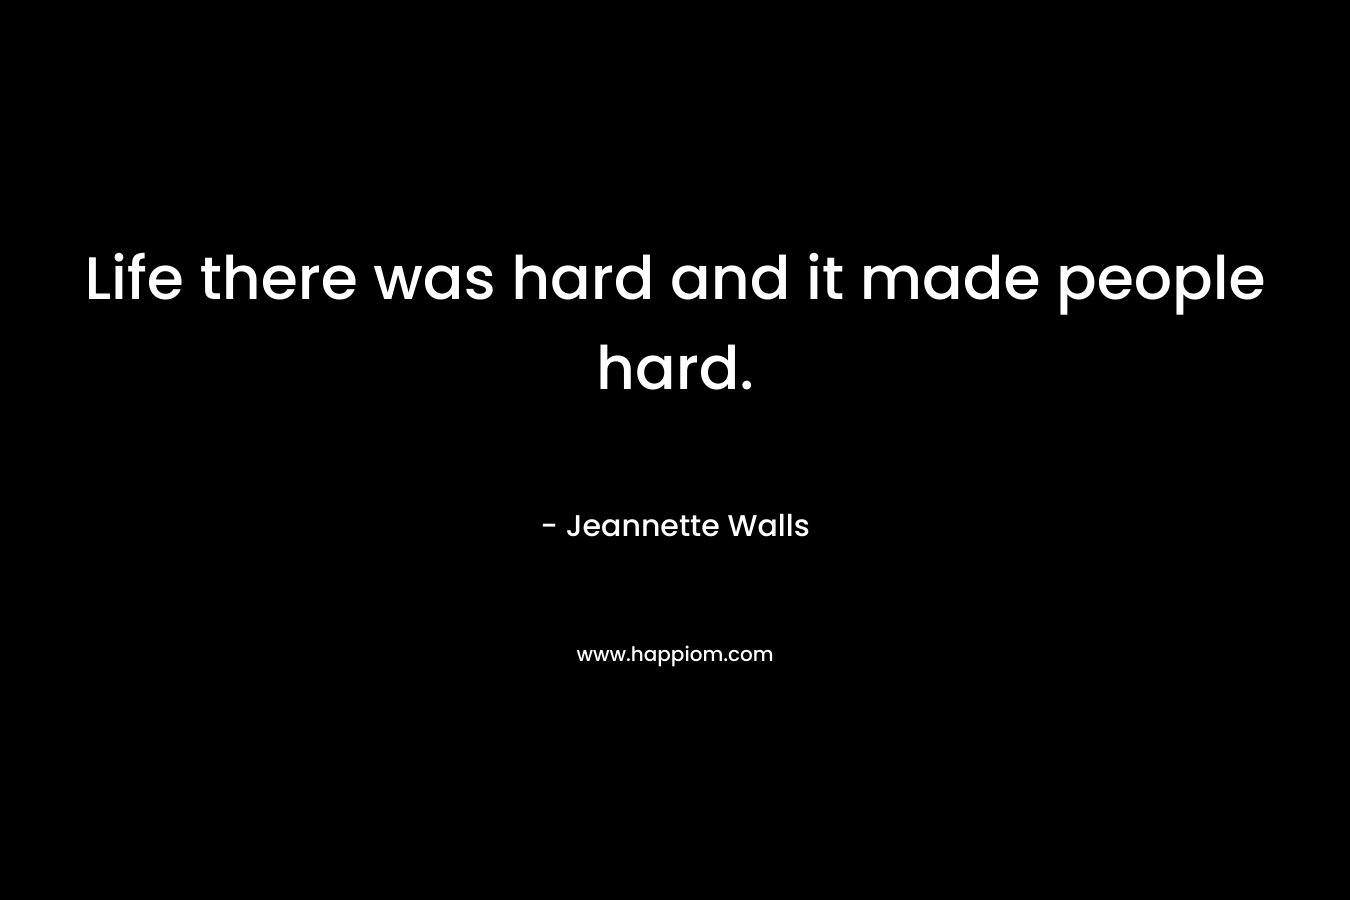 Life there was hard and it made people hard. – Jeannette Walls